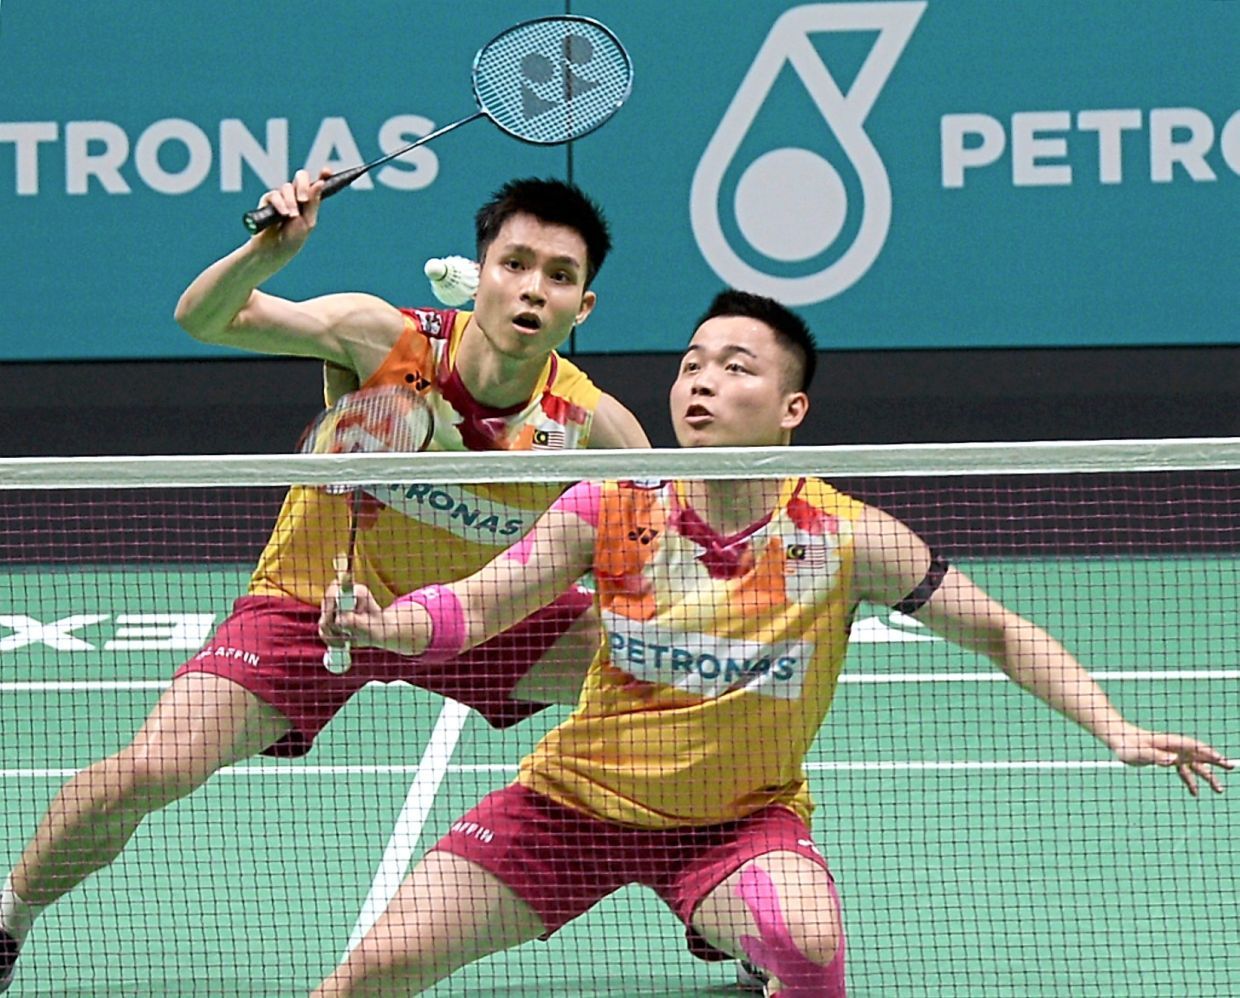 Aaron-Wooi Yik enter All-England semis in style but Zii Jia goes down fighting